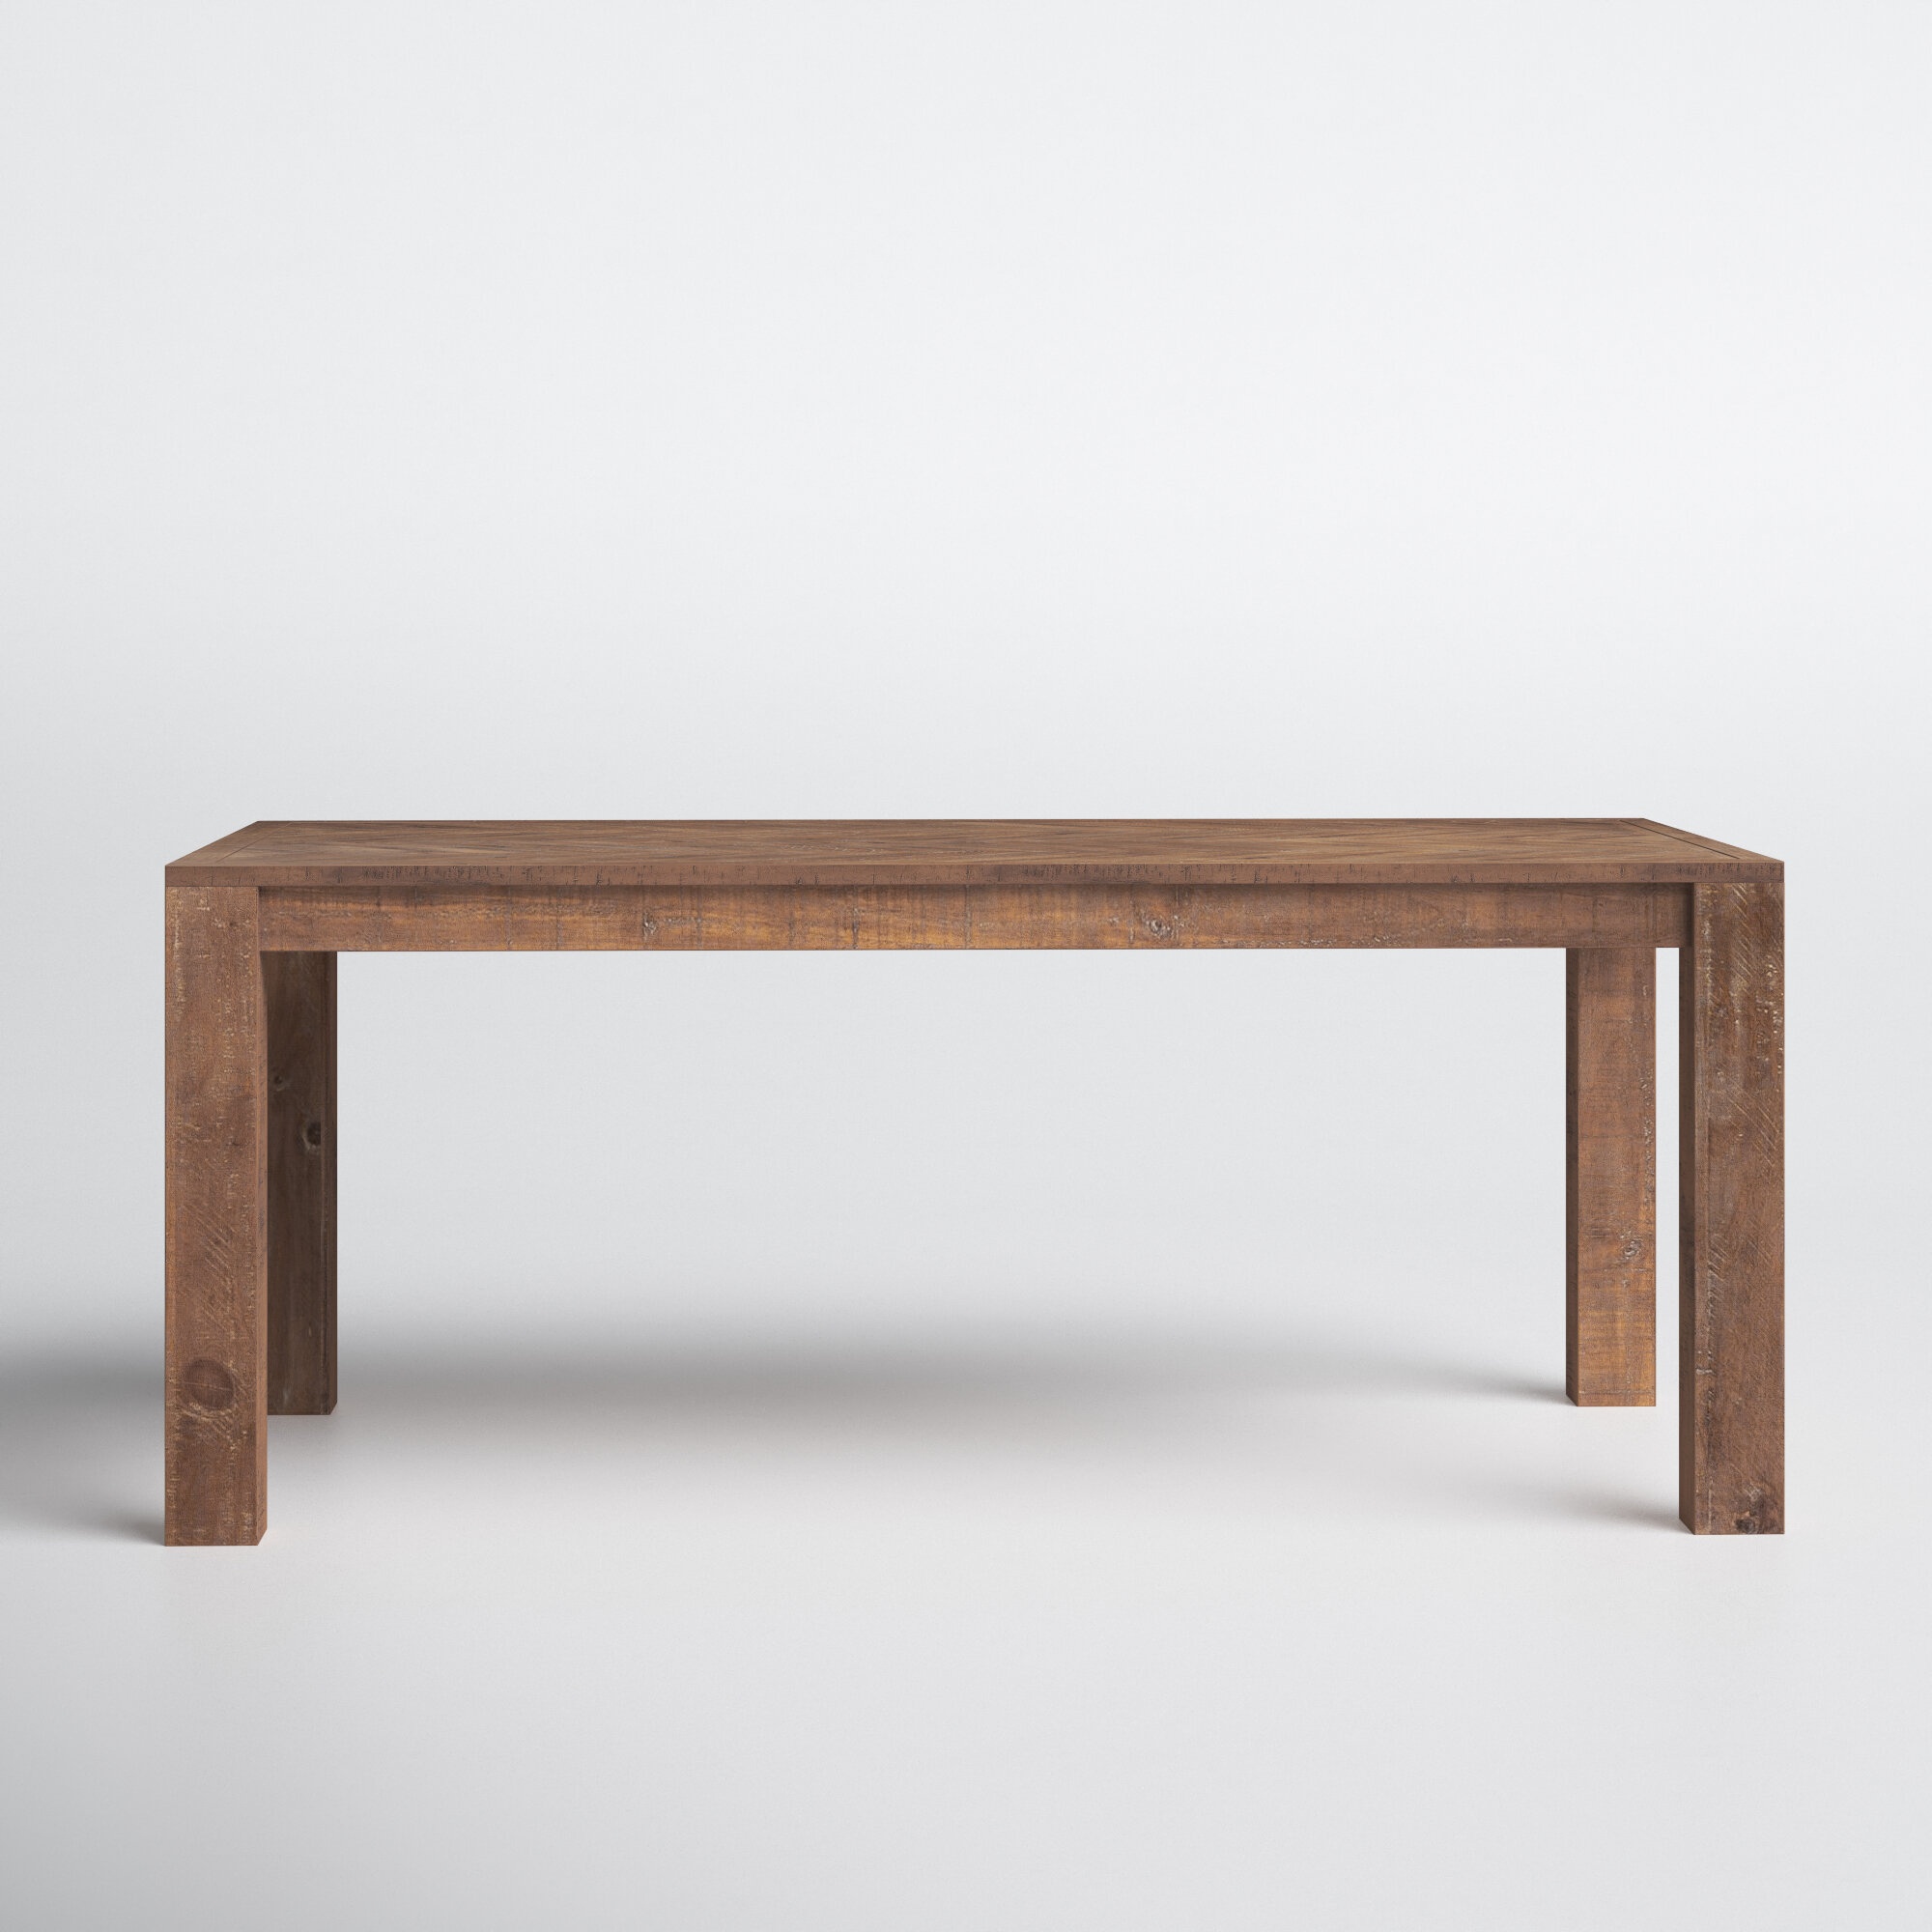 Long Skinny Dining Table - VisualHunt